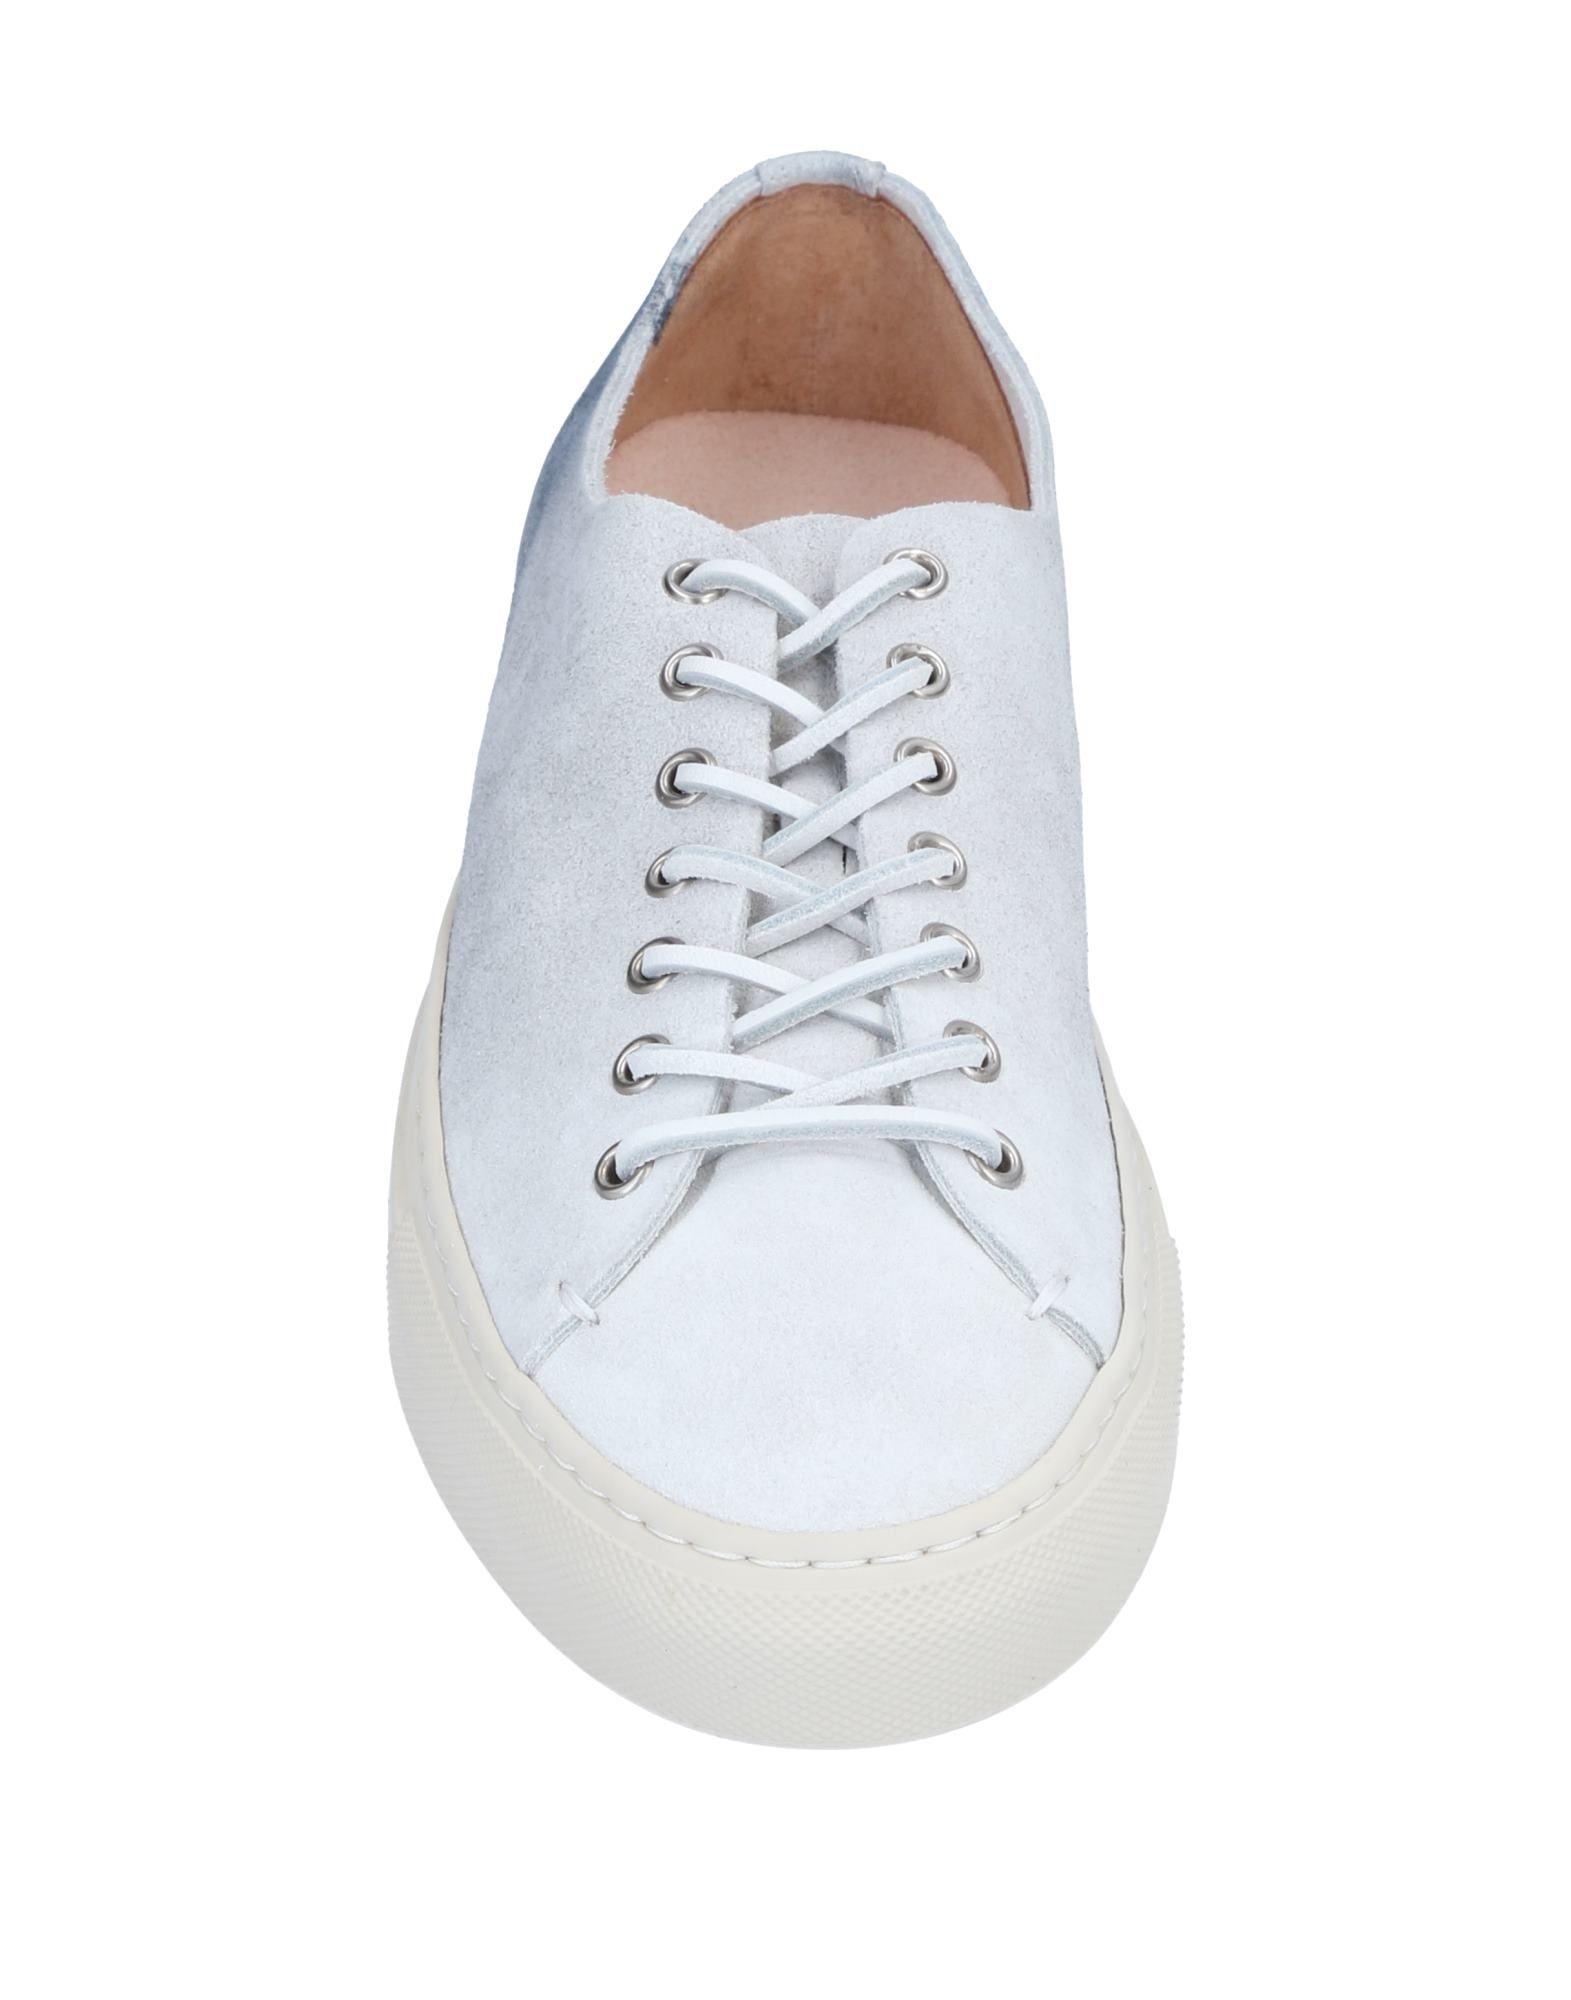 Buttero Suede Low-tops & Sneakers in White for Men - Lyst